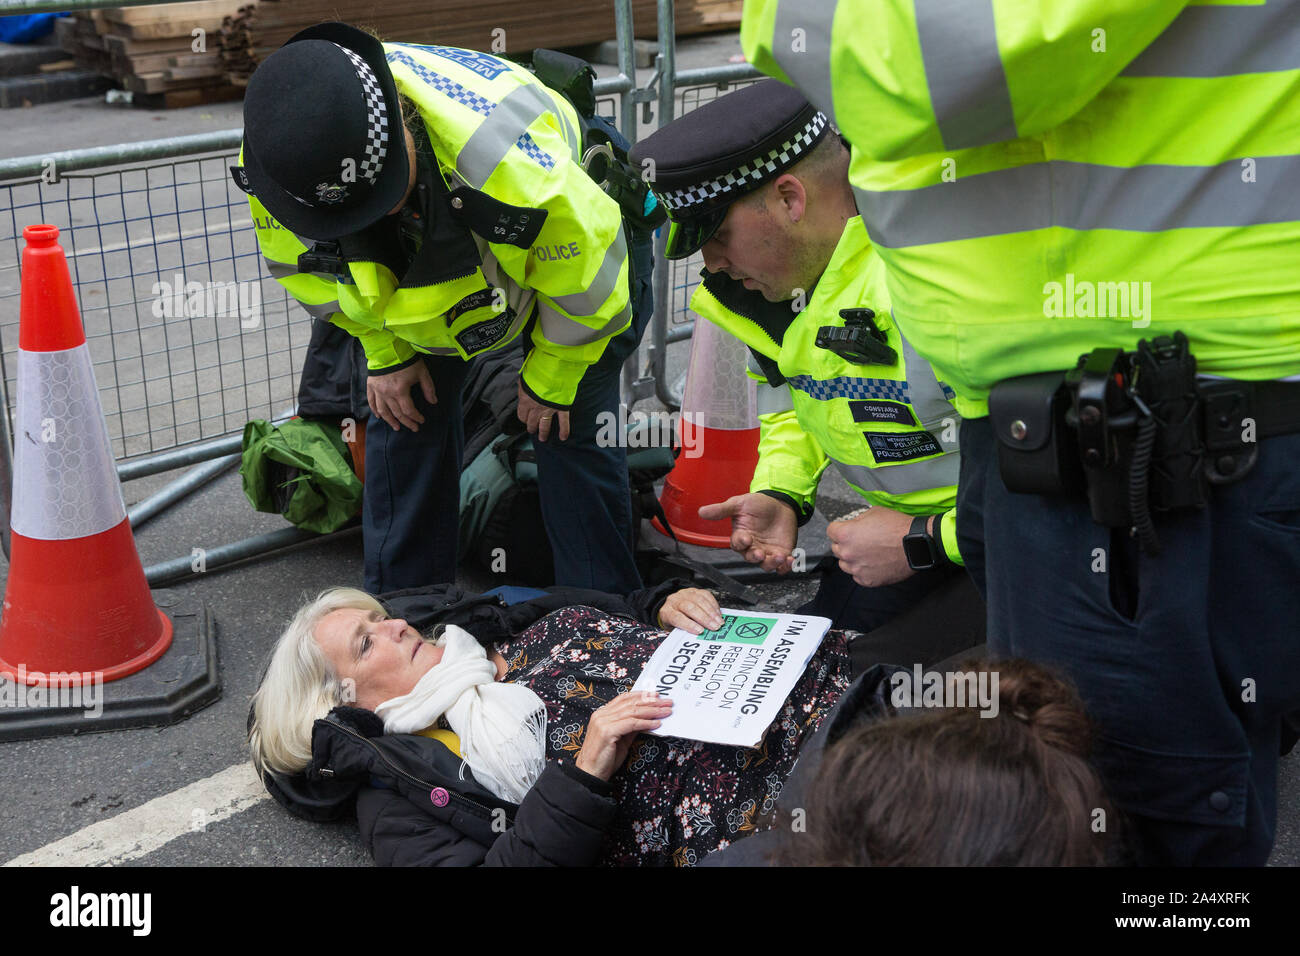 London, UK. 16 October, 2019. Police officers arrest a climate activist from Extinction Rebellion who had defied the Metropolitan Police prohibition on Extinction Rebellion Autumn Uprising protests throughout London under Section 14 of the Public Order Act 1986 by sitting in the road in Whitehall. Credit: Mark Kerrison/Alamy Live News Stock Photo